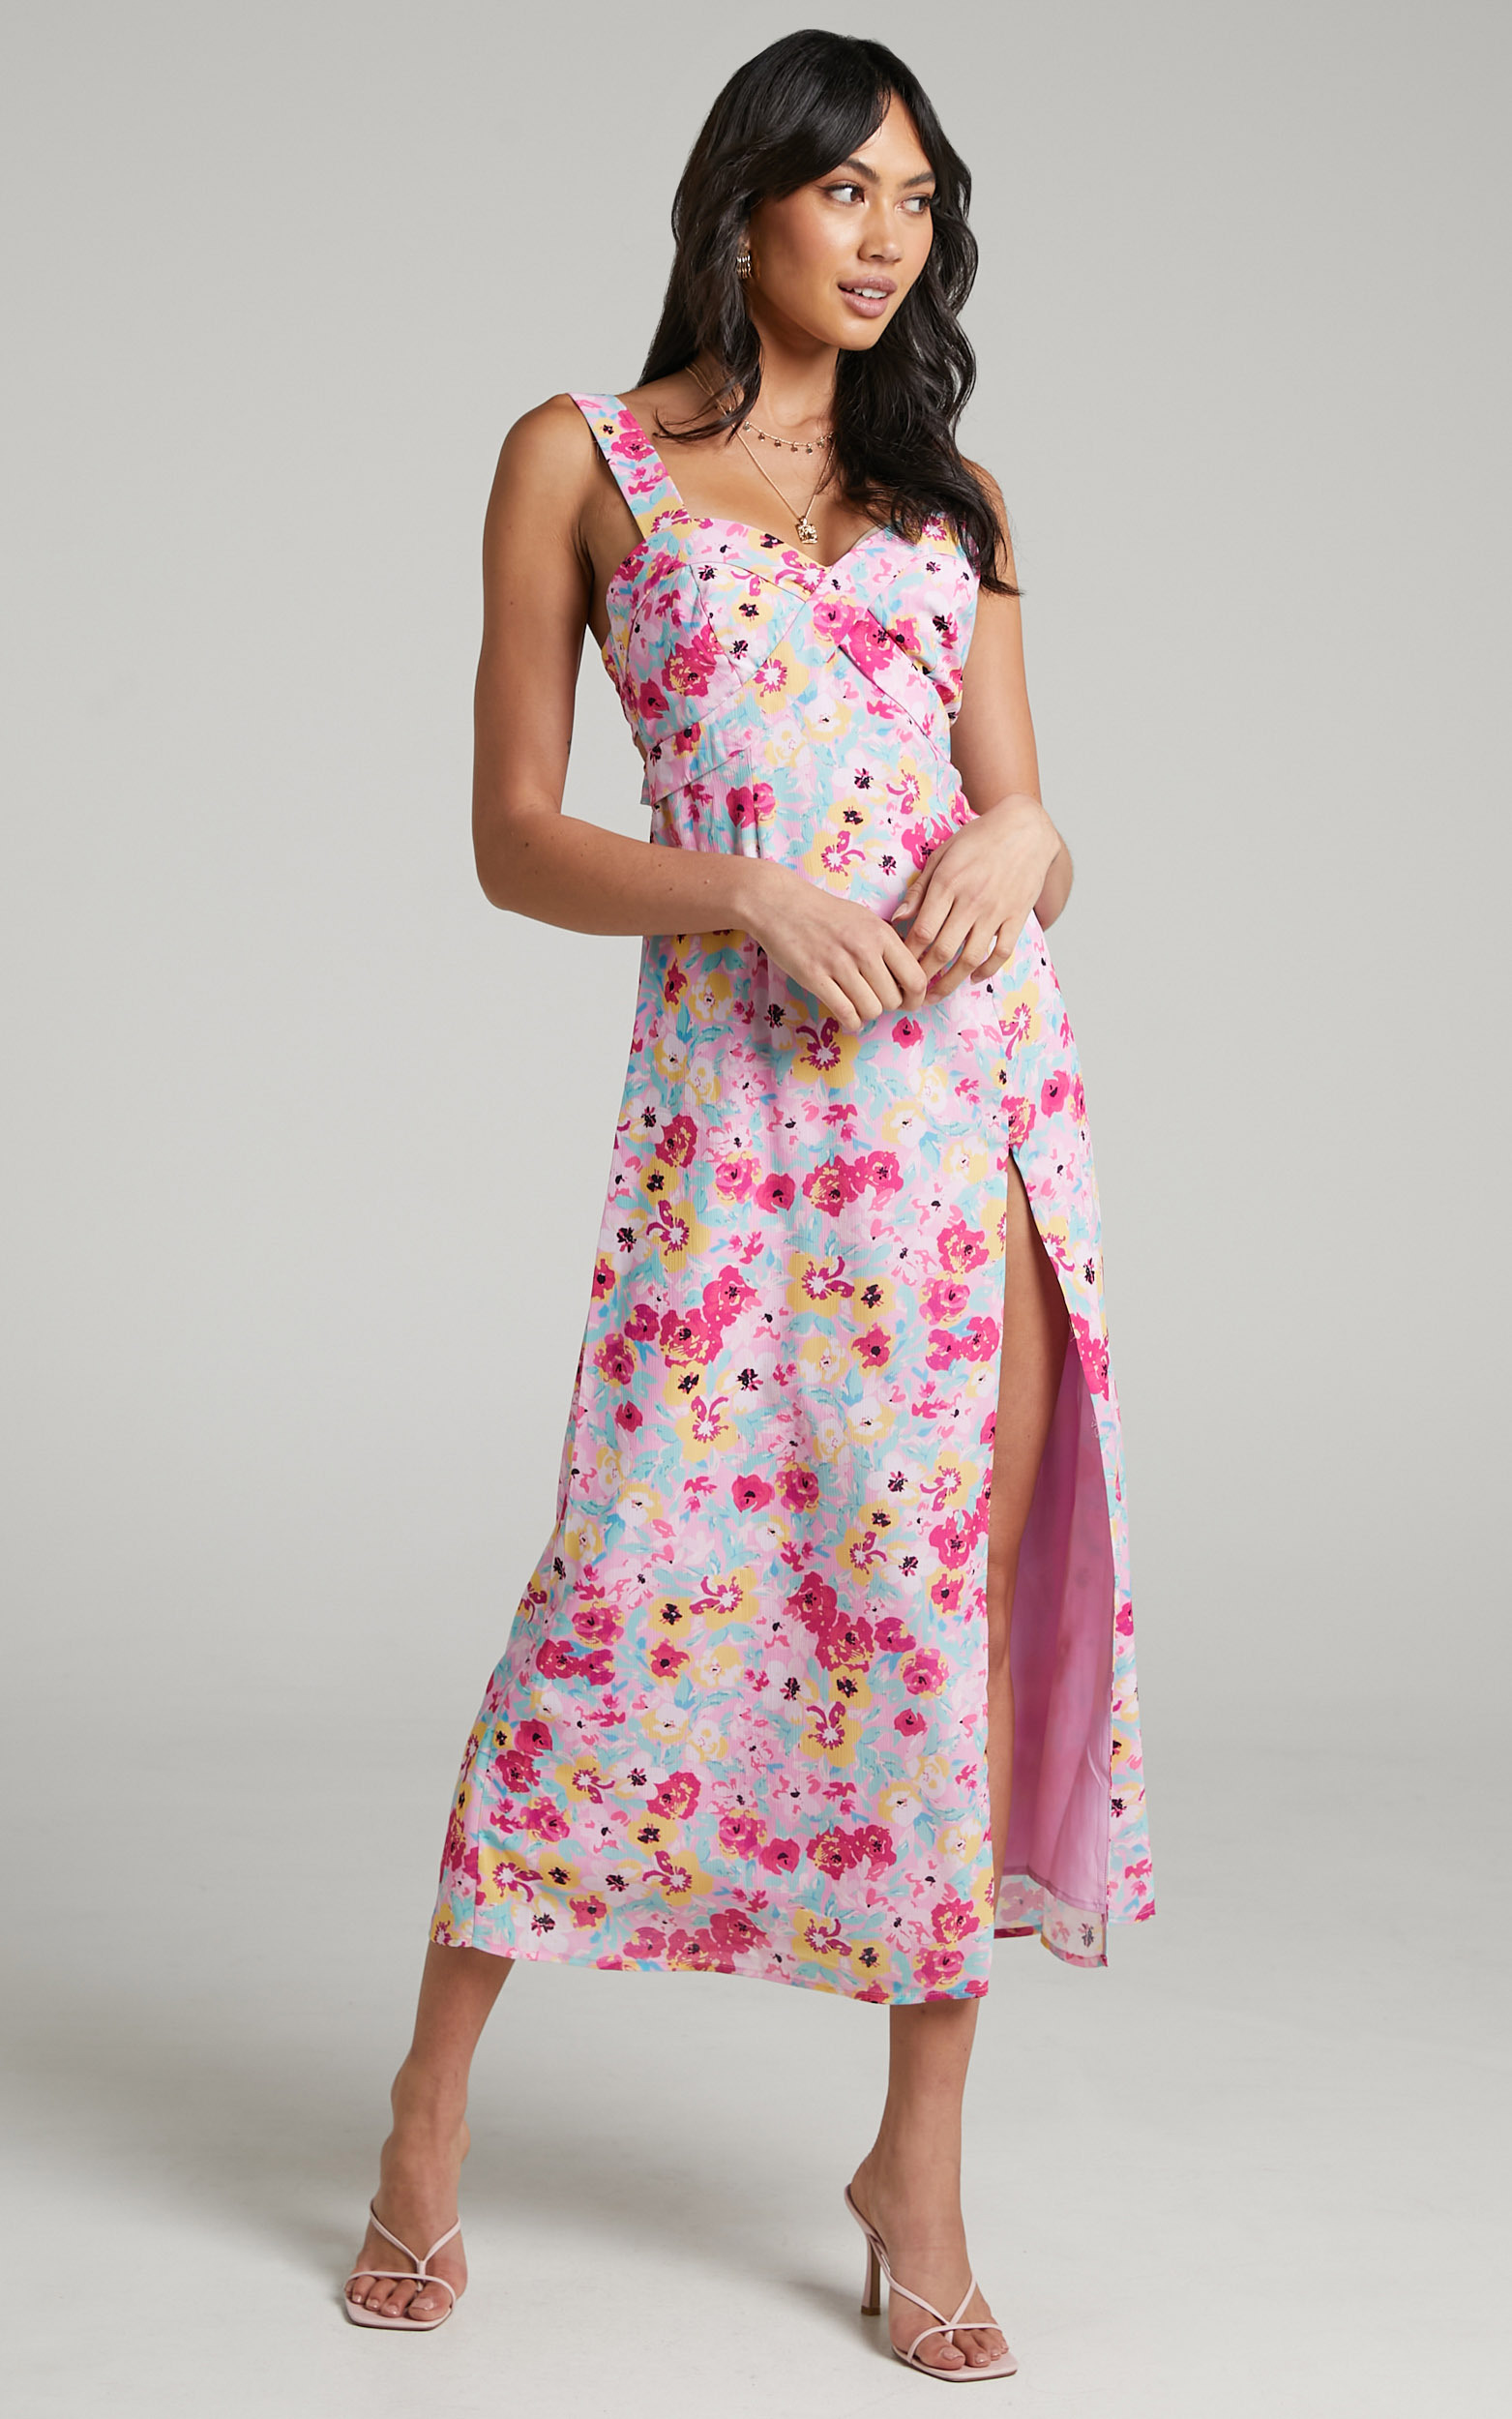 Frederica Strappy Midi dress in Pink Panther - 06, PNK1, hi-res image number null